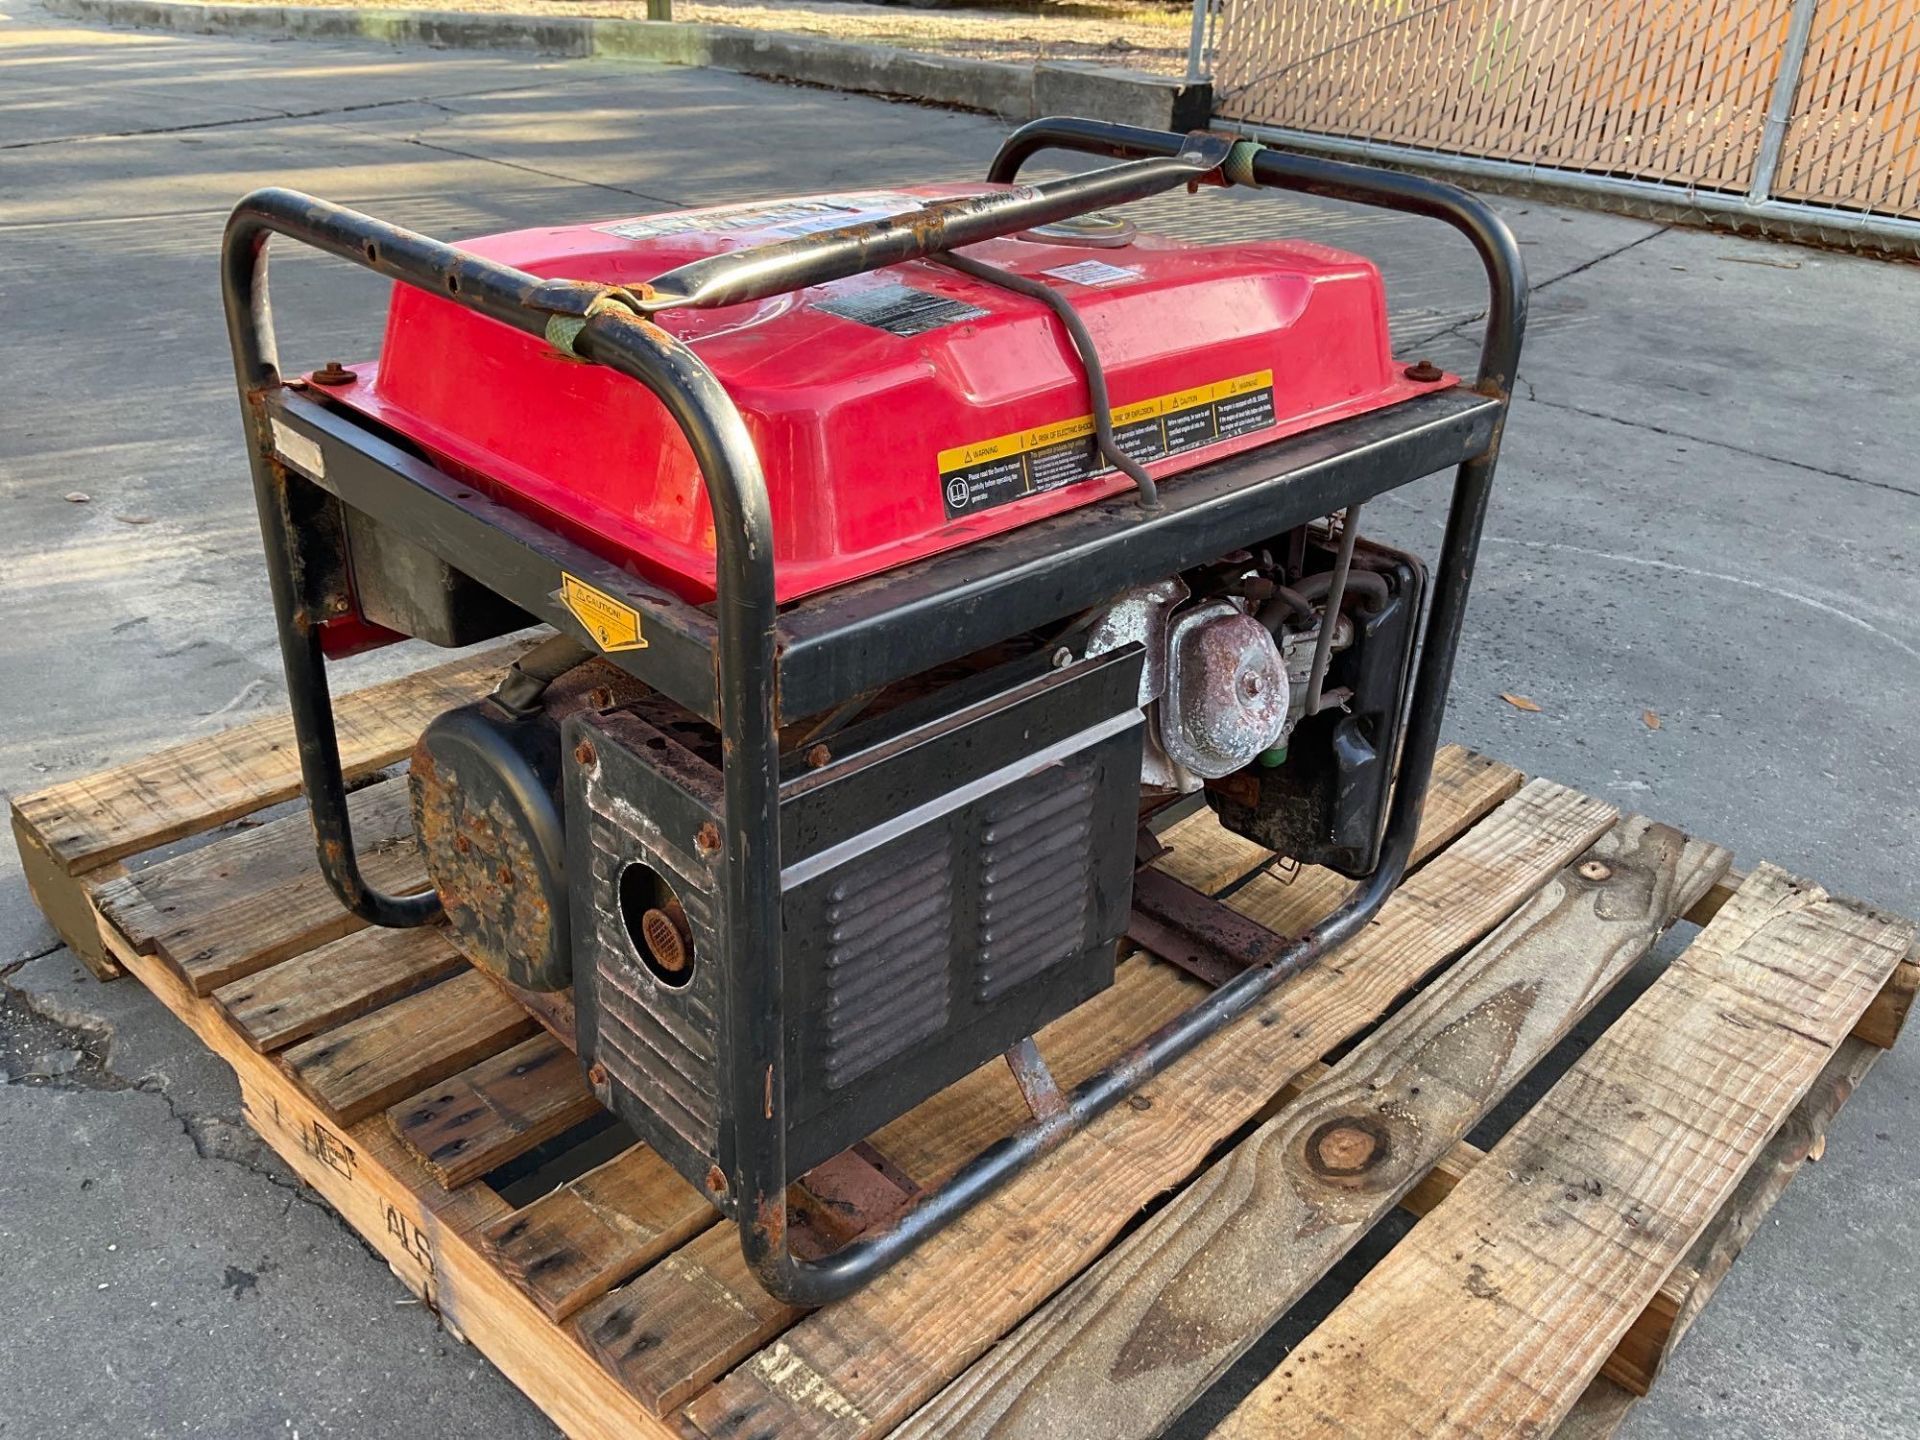 GENTRON PRO2 7500W GENERATOR MIDEL GG7500, GAS POWERED, APPROX 120/240 RATED VOLTS, SINGLE PHASE, - Image 15 of 21